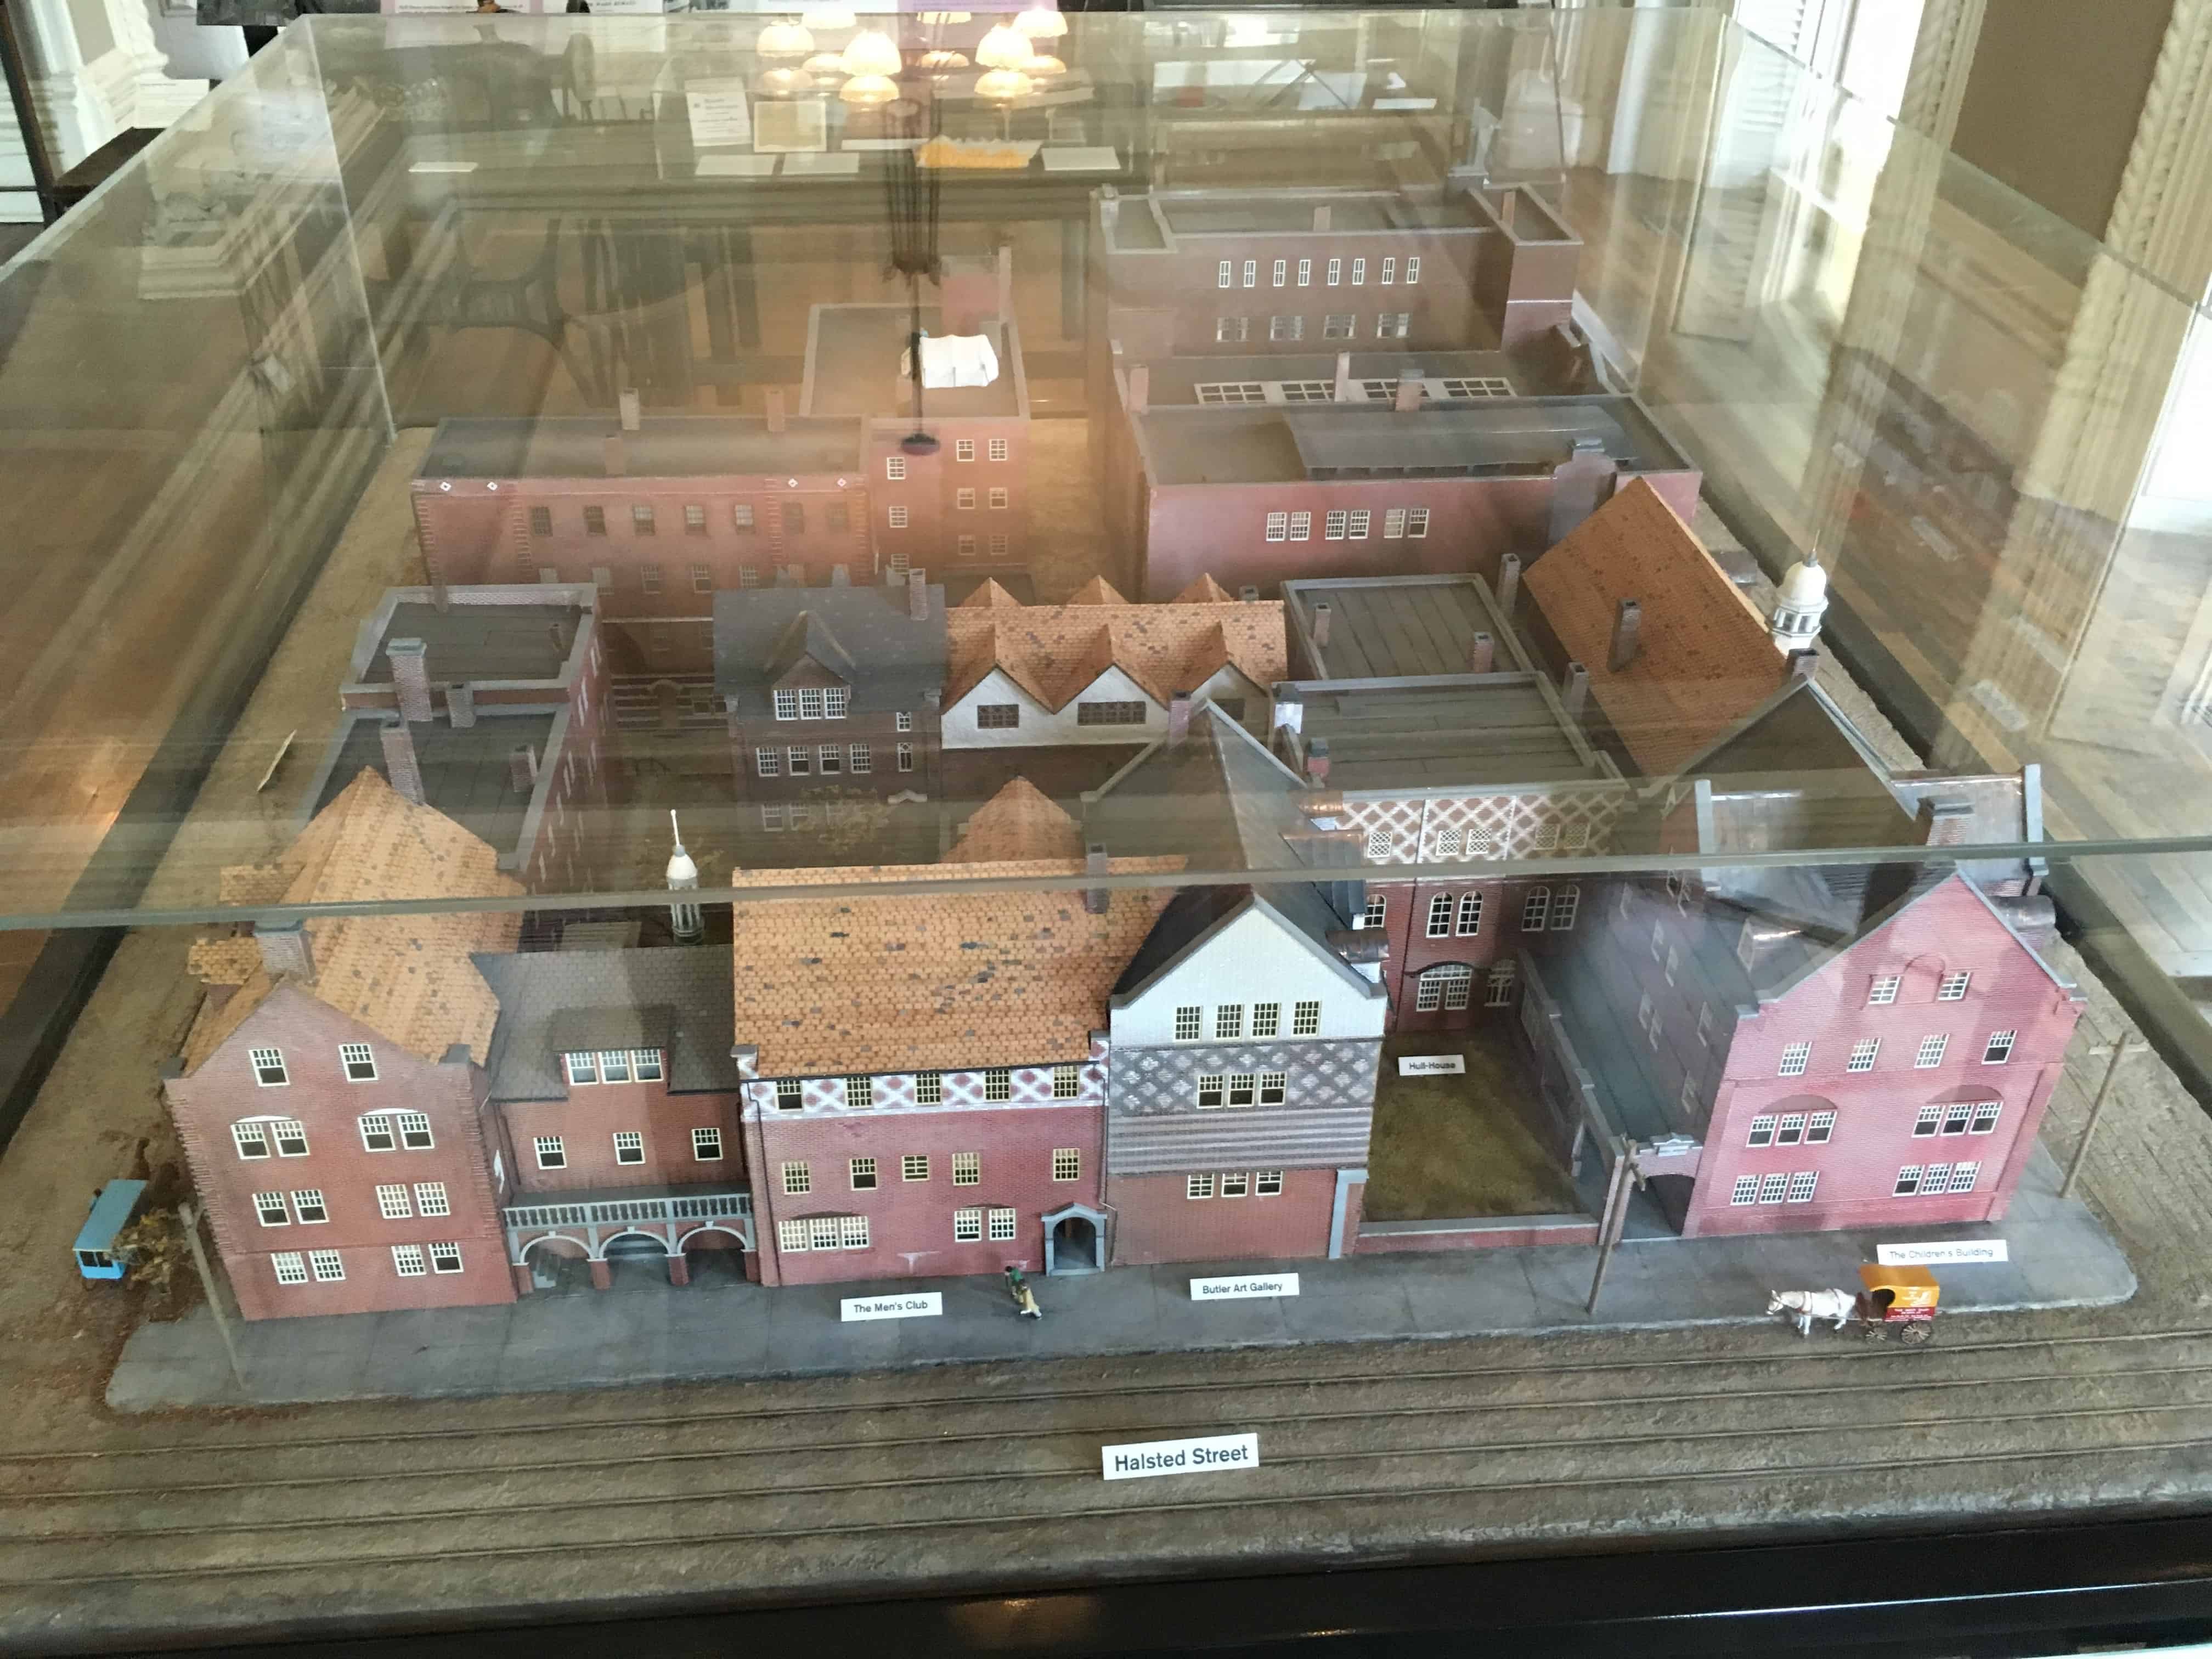 Scale model of the Hull House complex in Chicago, Illinois